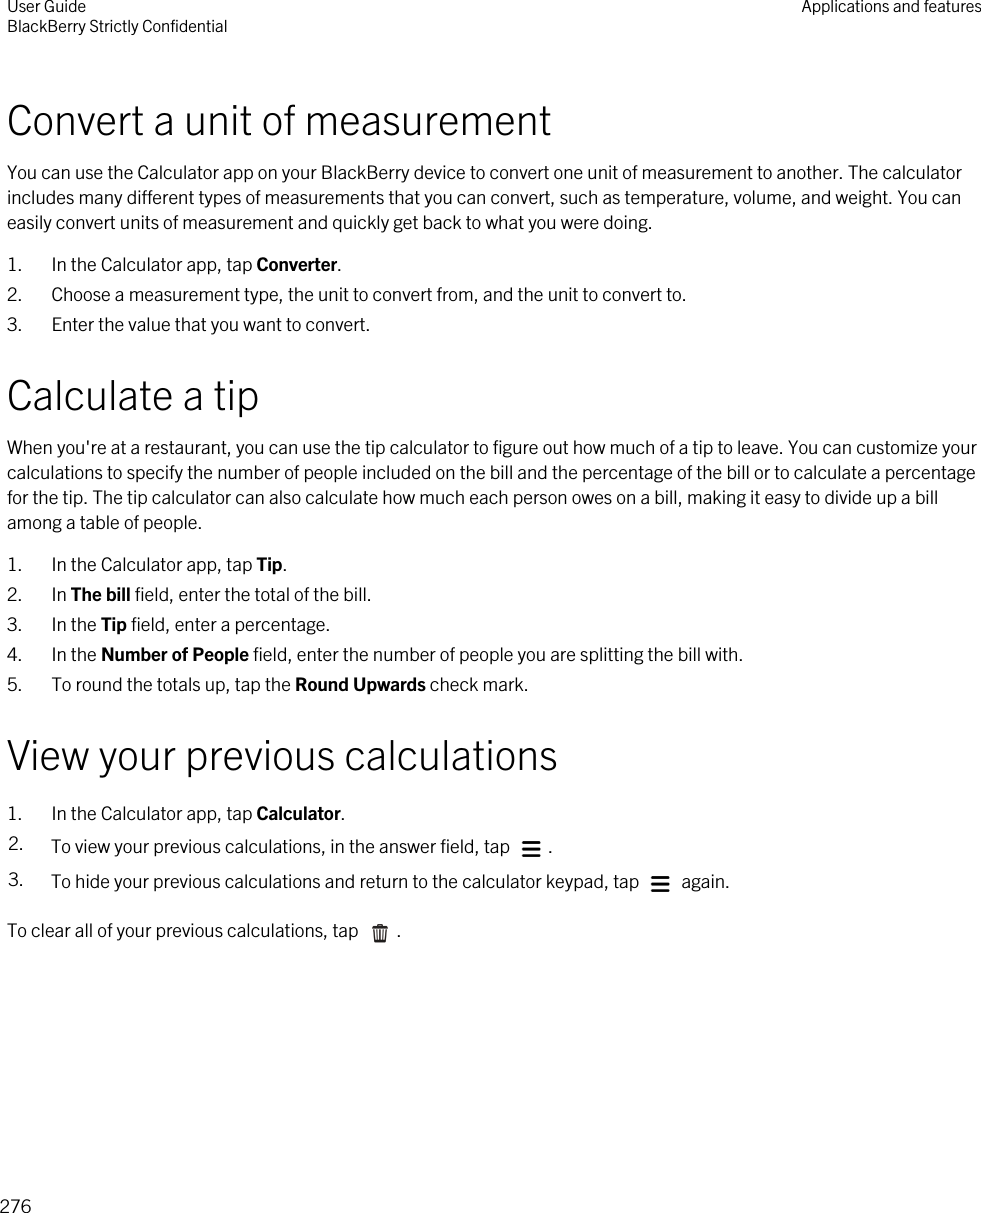 Convert a unit of measurementYou can use the Calculator app on your BlackBerry device to convert one unit of measurement to another. The calculator includes many different types of measurements that you can convert, such as temperature, volume, and weight. You can easily convert units of measurement and quickly get back to what you were doing.1. In the Calculator app, tap Converter.2. Choose a measurement type, the unit to convert from, and the unit to convert to.3. Enter the value that you want to convert.Calculate a tipWhen you&apos;re at a restaurant, you can use the tip calculator to figure out how much of a tip to leave. You can customize your calculations to specify the number of people included on the bill and the percentage of the bill or to calculate a percentage for the tip. The tip calculator can also calculate how much each person owes on a bill, making it easy to divide up a bill among a table of people.1. In the Calculator app, tap Tip.2. In The bill field, enter the total of the bill.3. In the Tip field, enter a percentage.4. In the Number of People field, enter the number of people you are splitting the bill with.5. To round the totals up, tap the Round Upwards check mark.View your previous calculations1. In the Calculator app, tap Calculator.2. To view your previous calculations, in the answer field, tap  .3. To hide your previous calculations and return to the calculator keypad, tap   again.To clear all of your previous calculations, tap  .User GuideBlackBerry Strictly Confidential Applications and features276